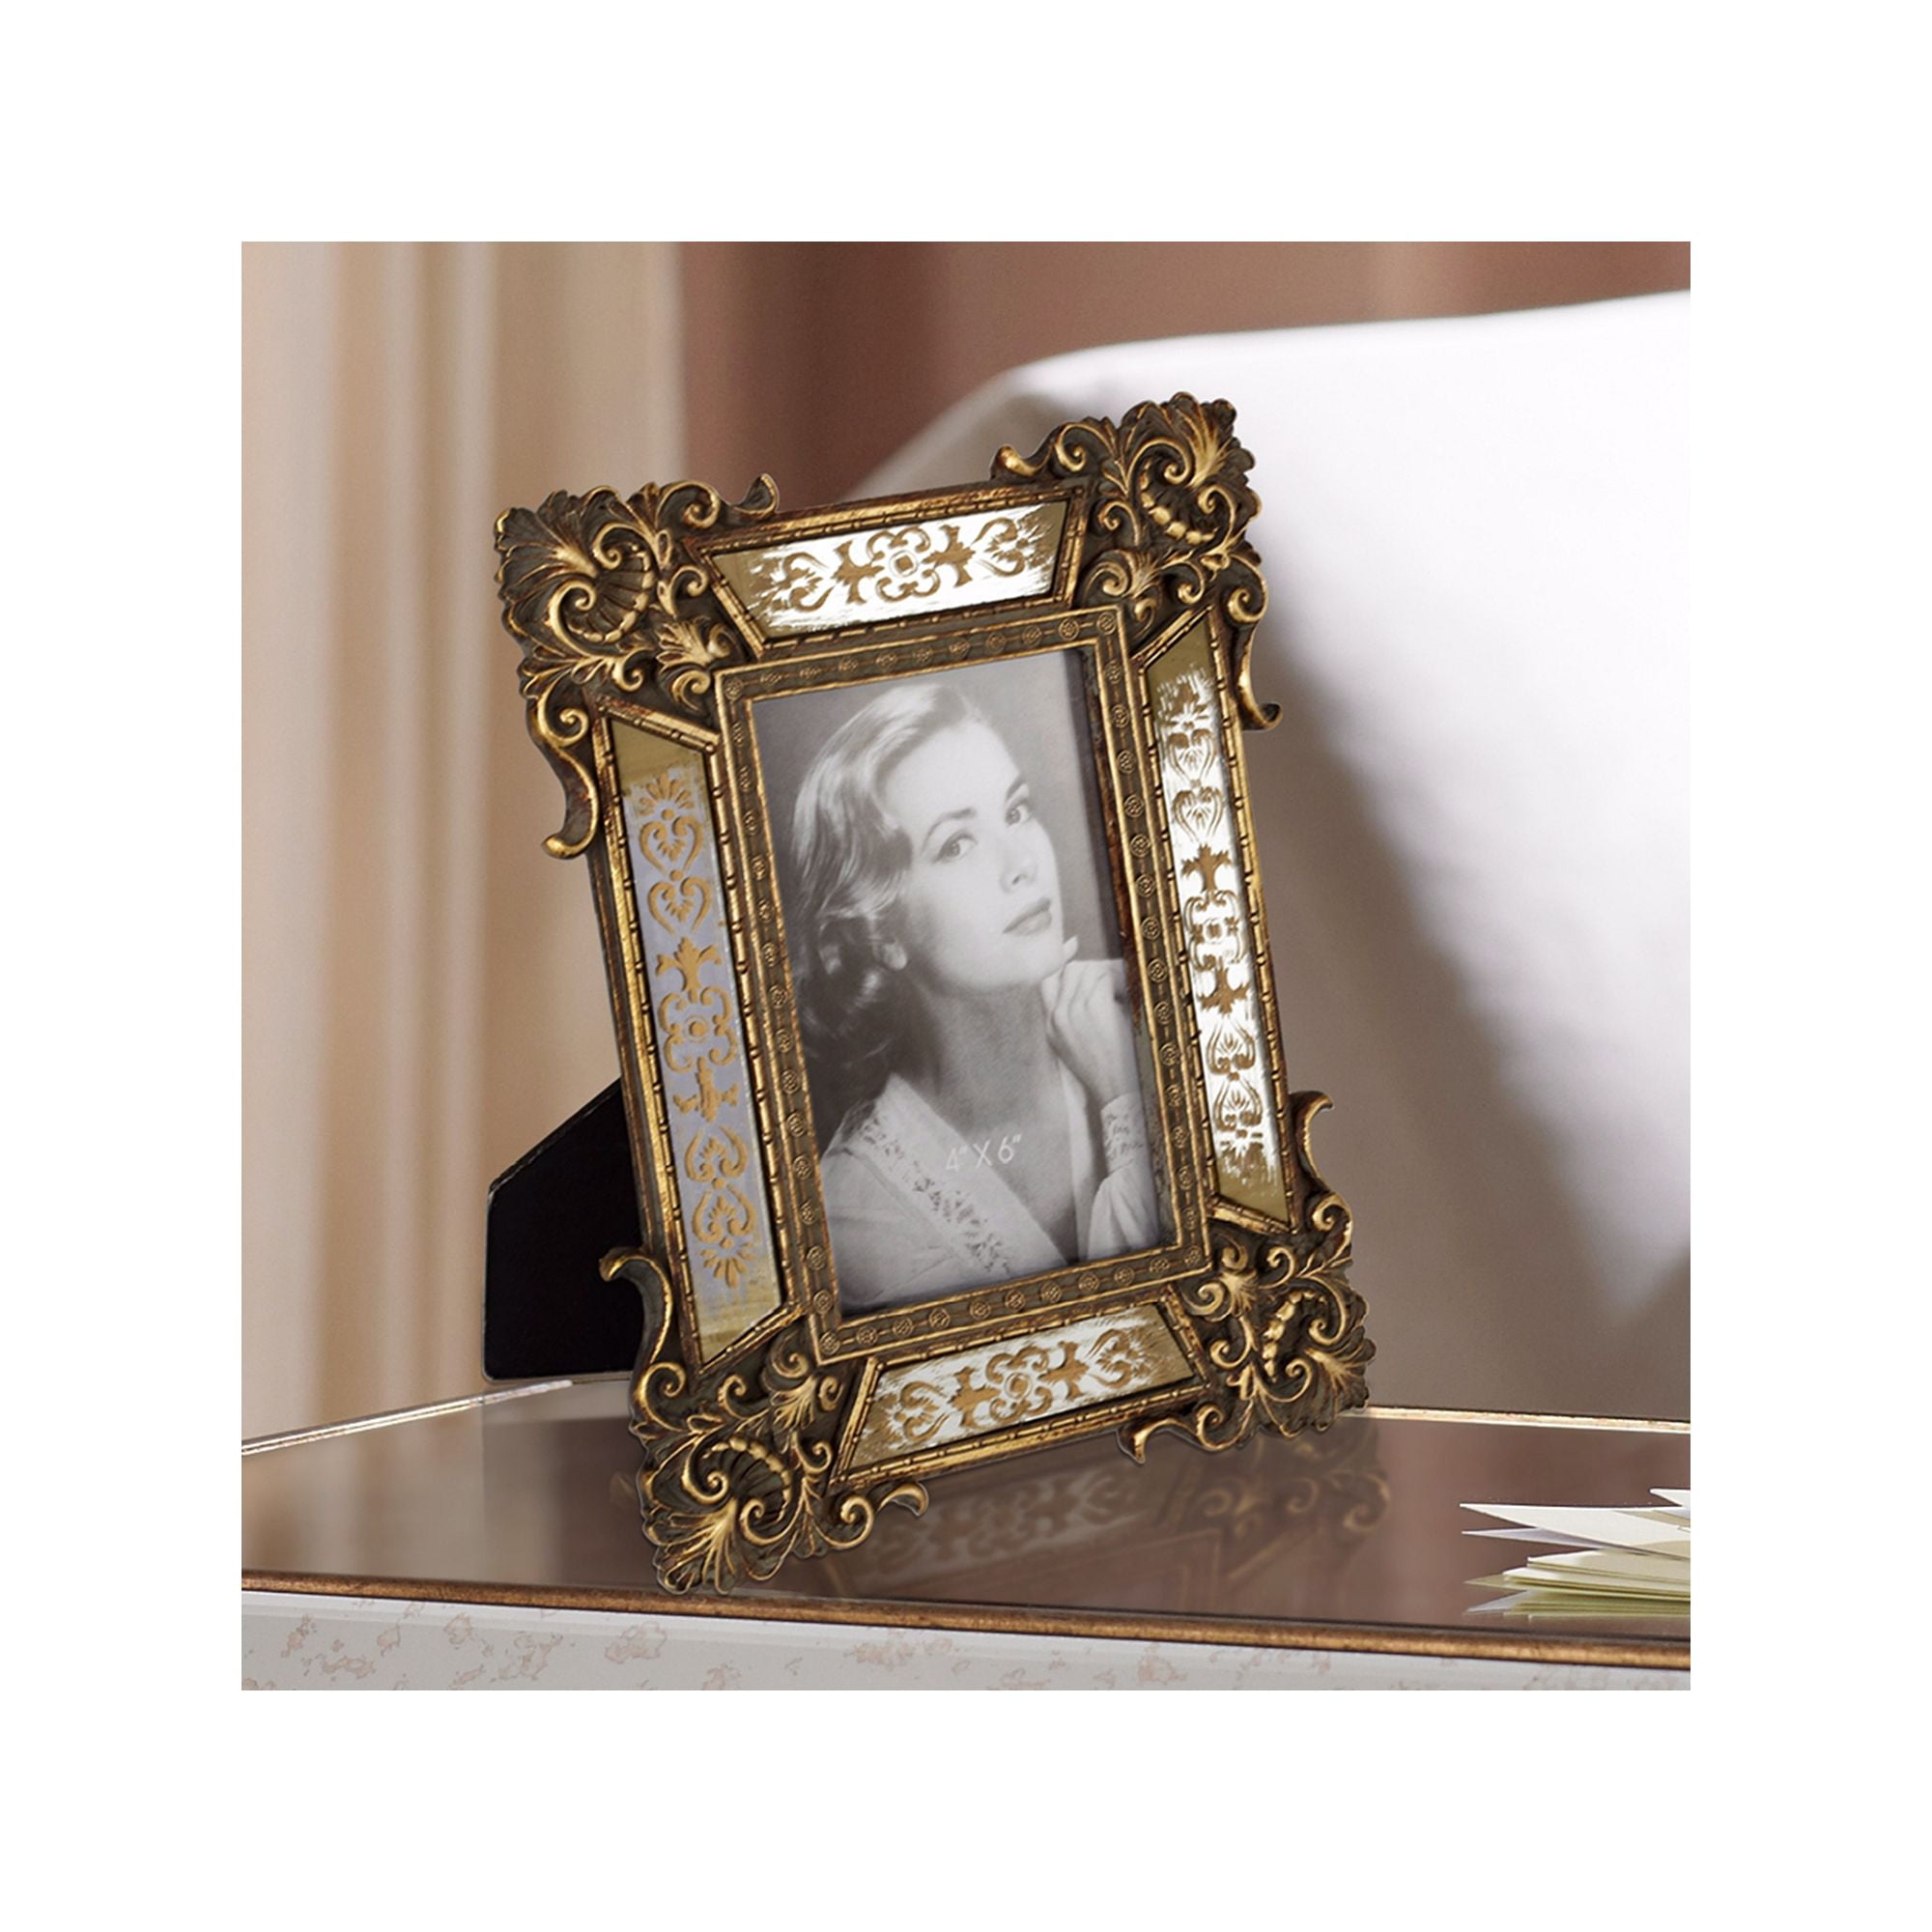 Fennco Styles Mother of Pearl Wood Photo Frame Photo Size 4x6